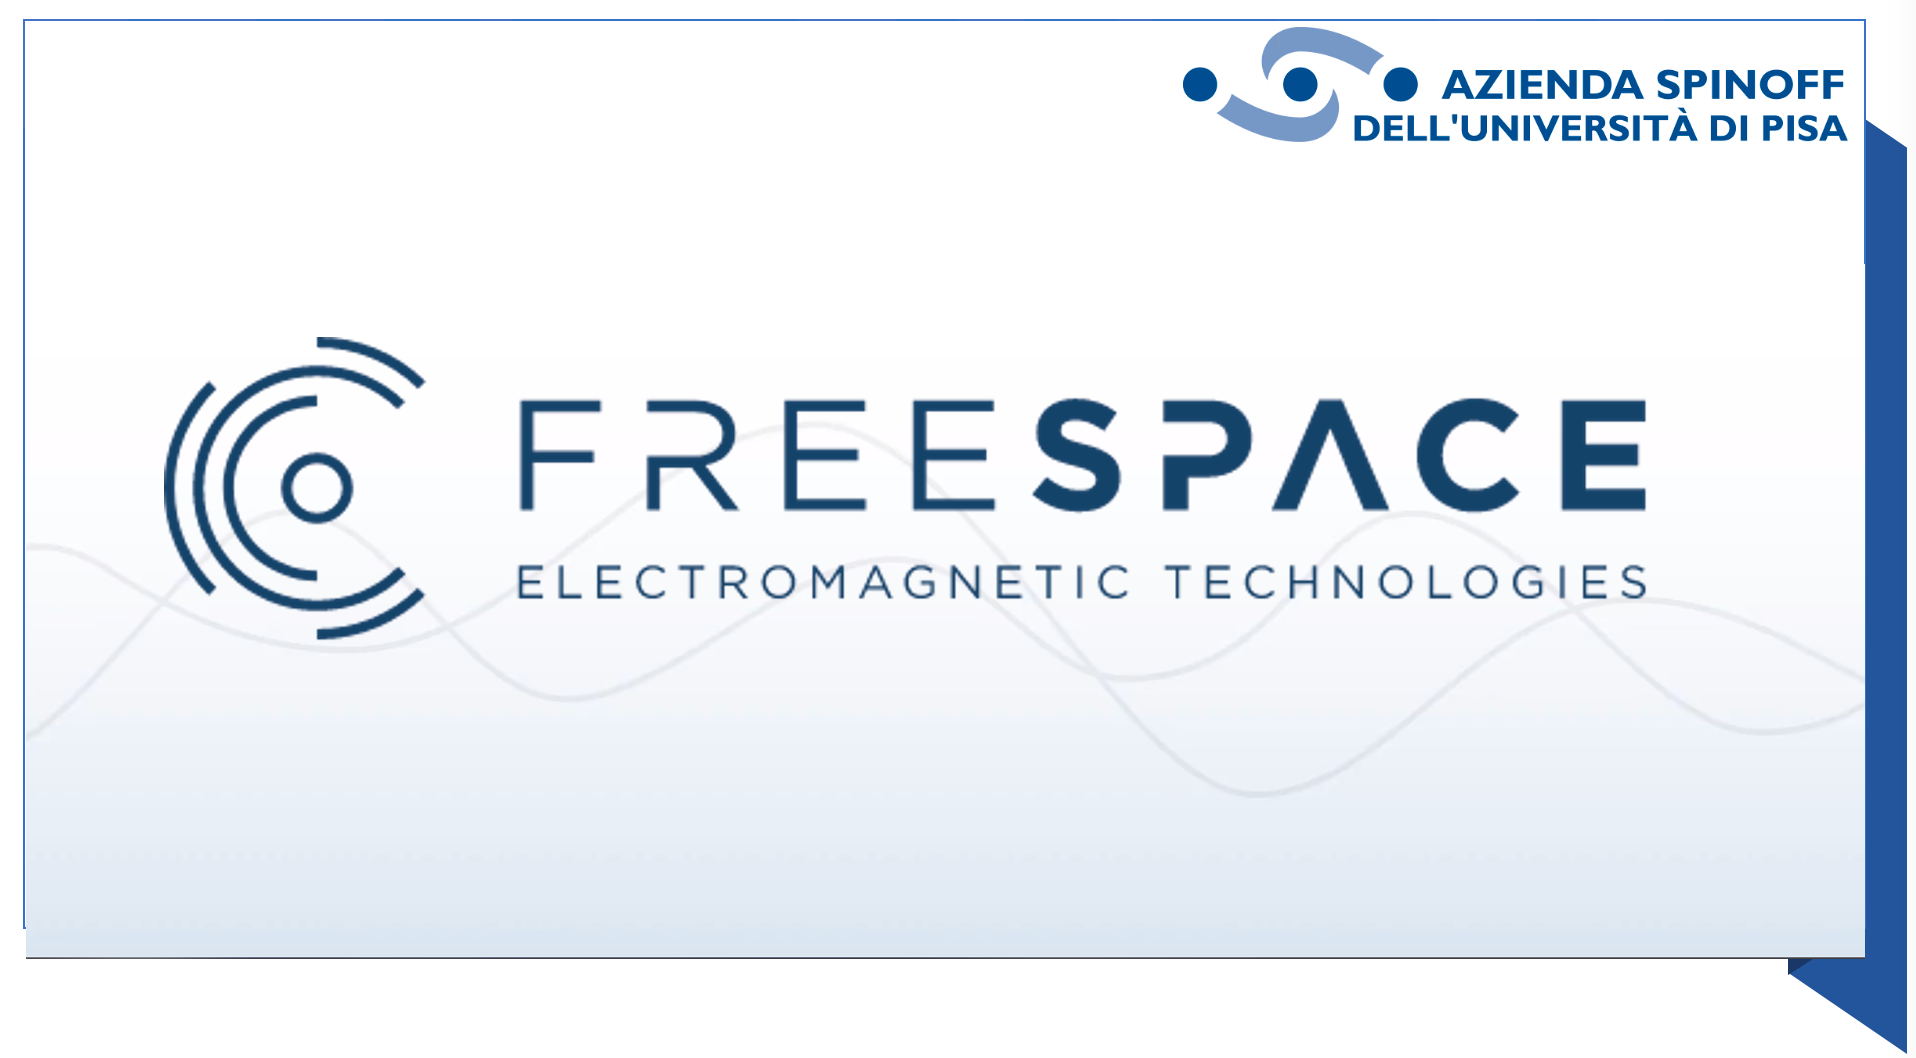 Free Space is now officially an University of Pisa Spin-off